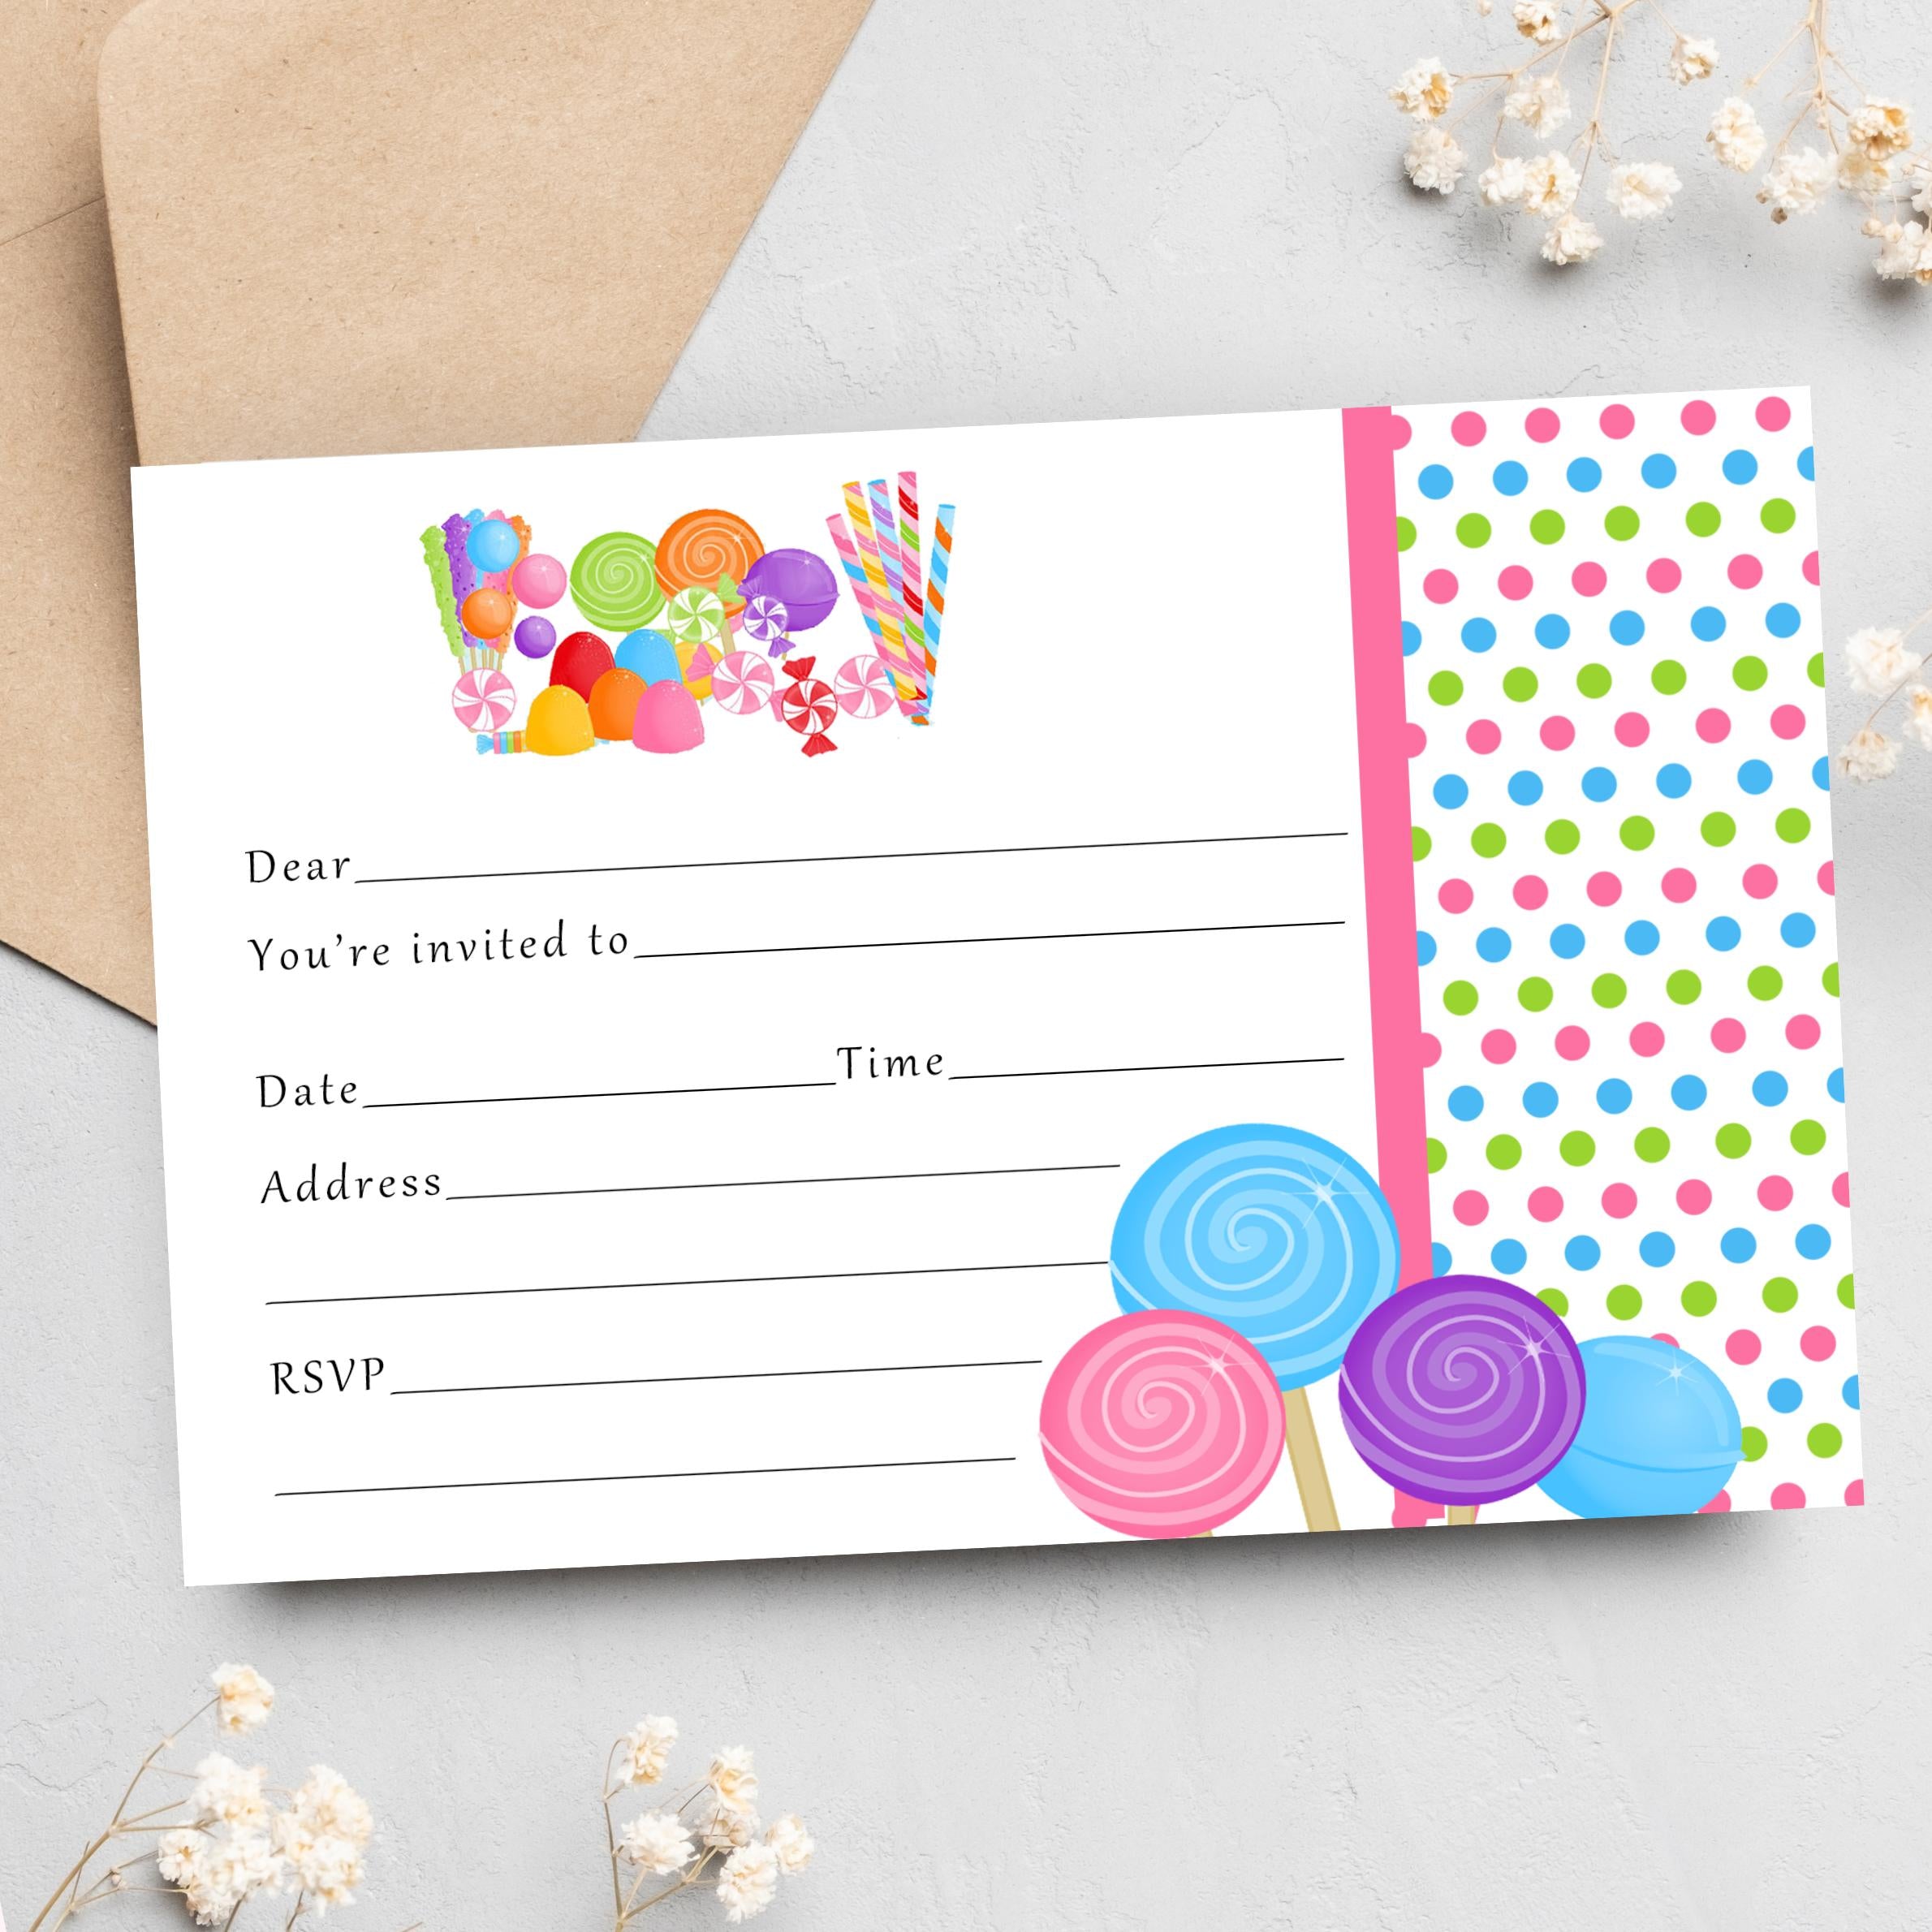 Sweets Candy Invitation Fill In Blank Kids Girl Birthday